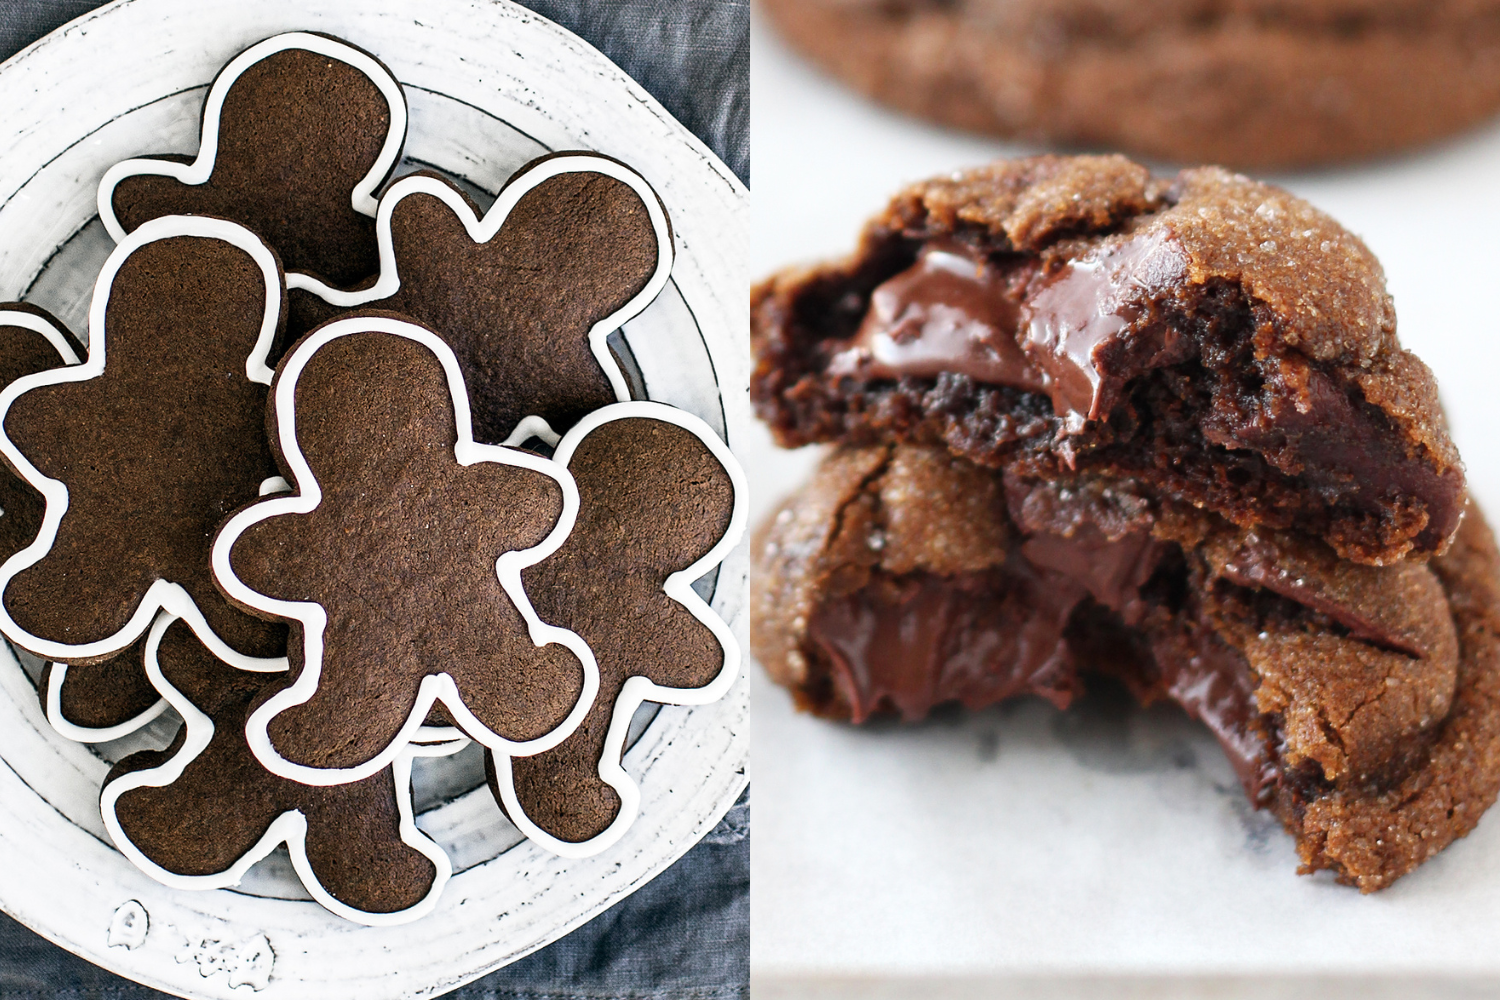 gingerbread men on a plate, next to a stack of chewy chocolate gingerbread cookies.